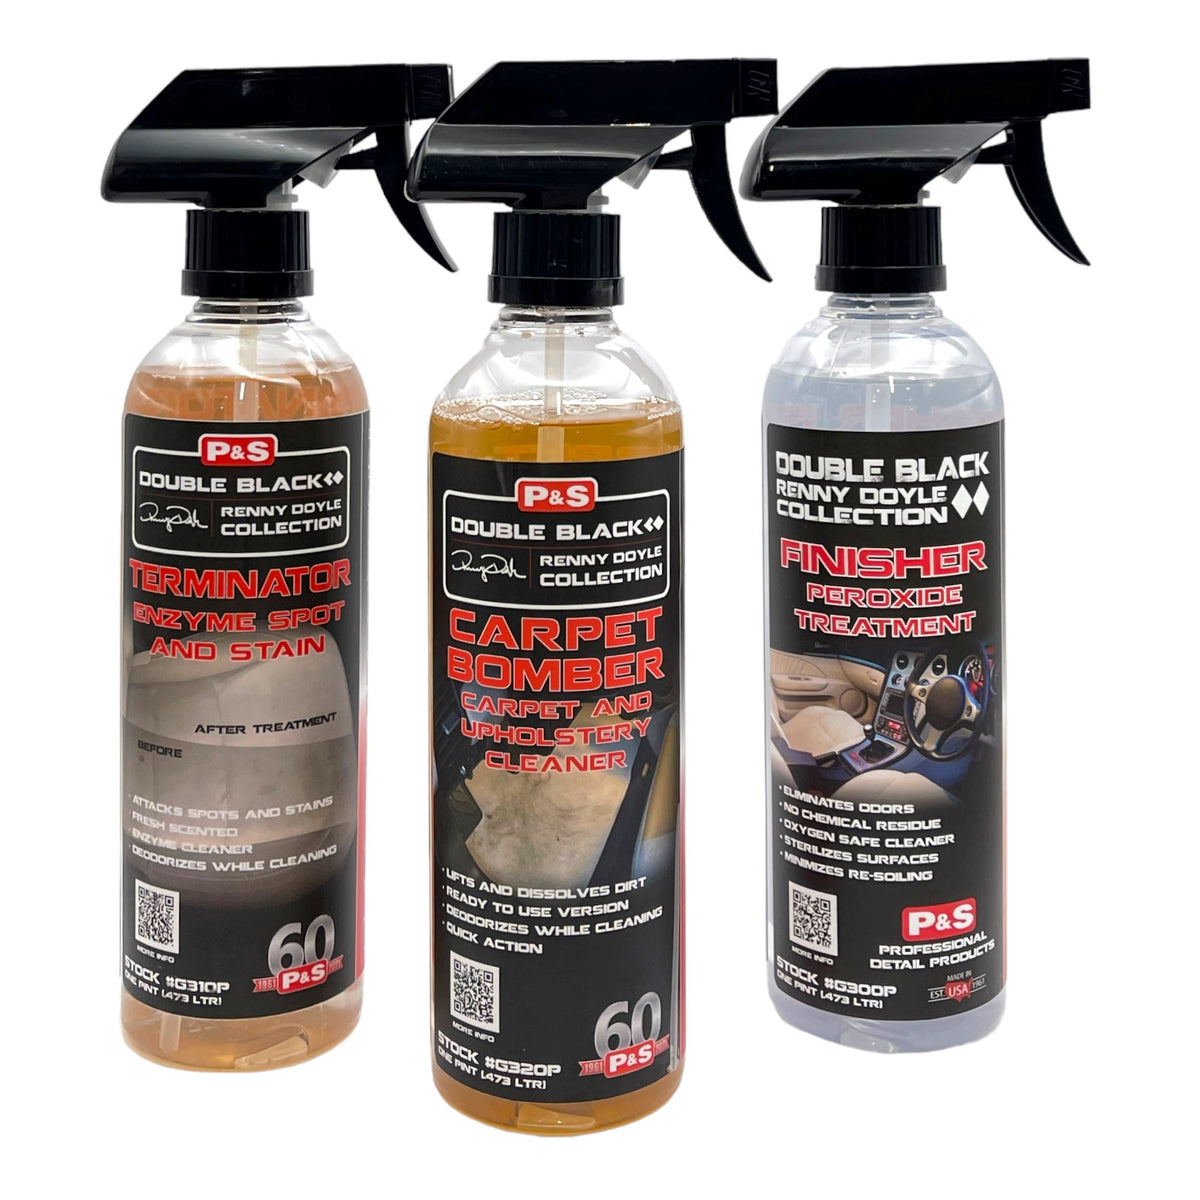 P&S Interior Cleaning 3 Step Gallon Kit | Terminator Carpet Bomber and  Finisher